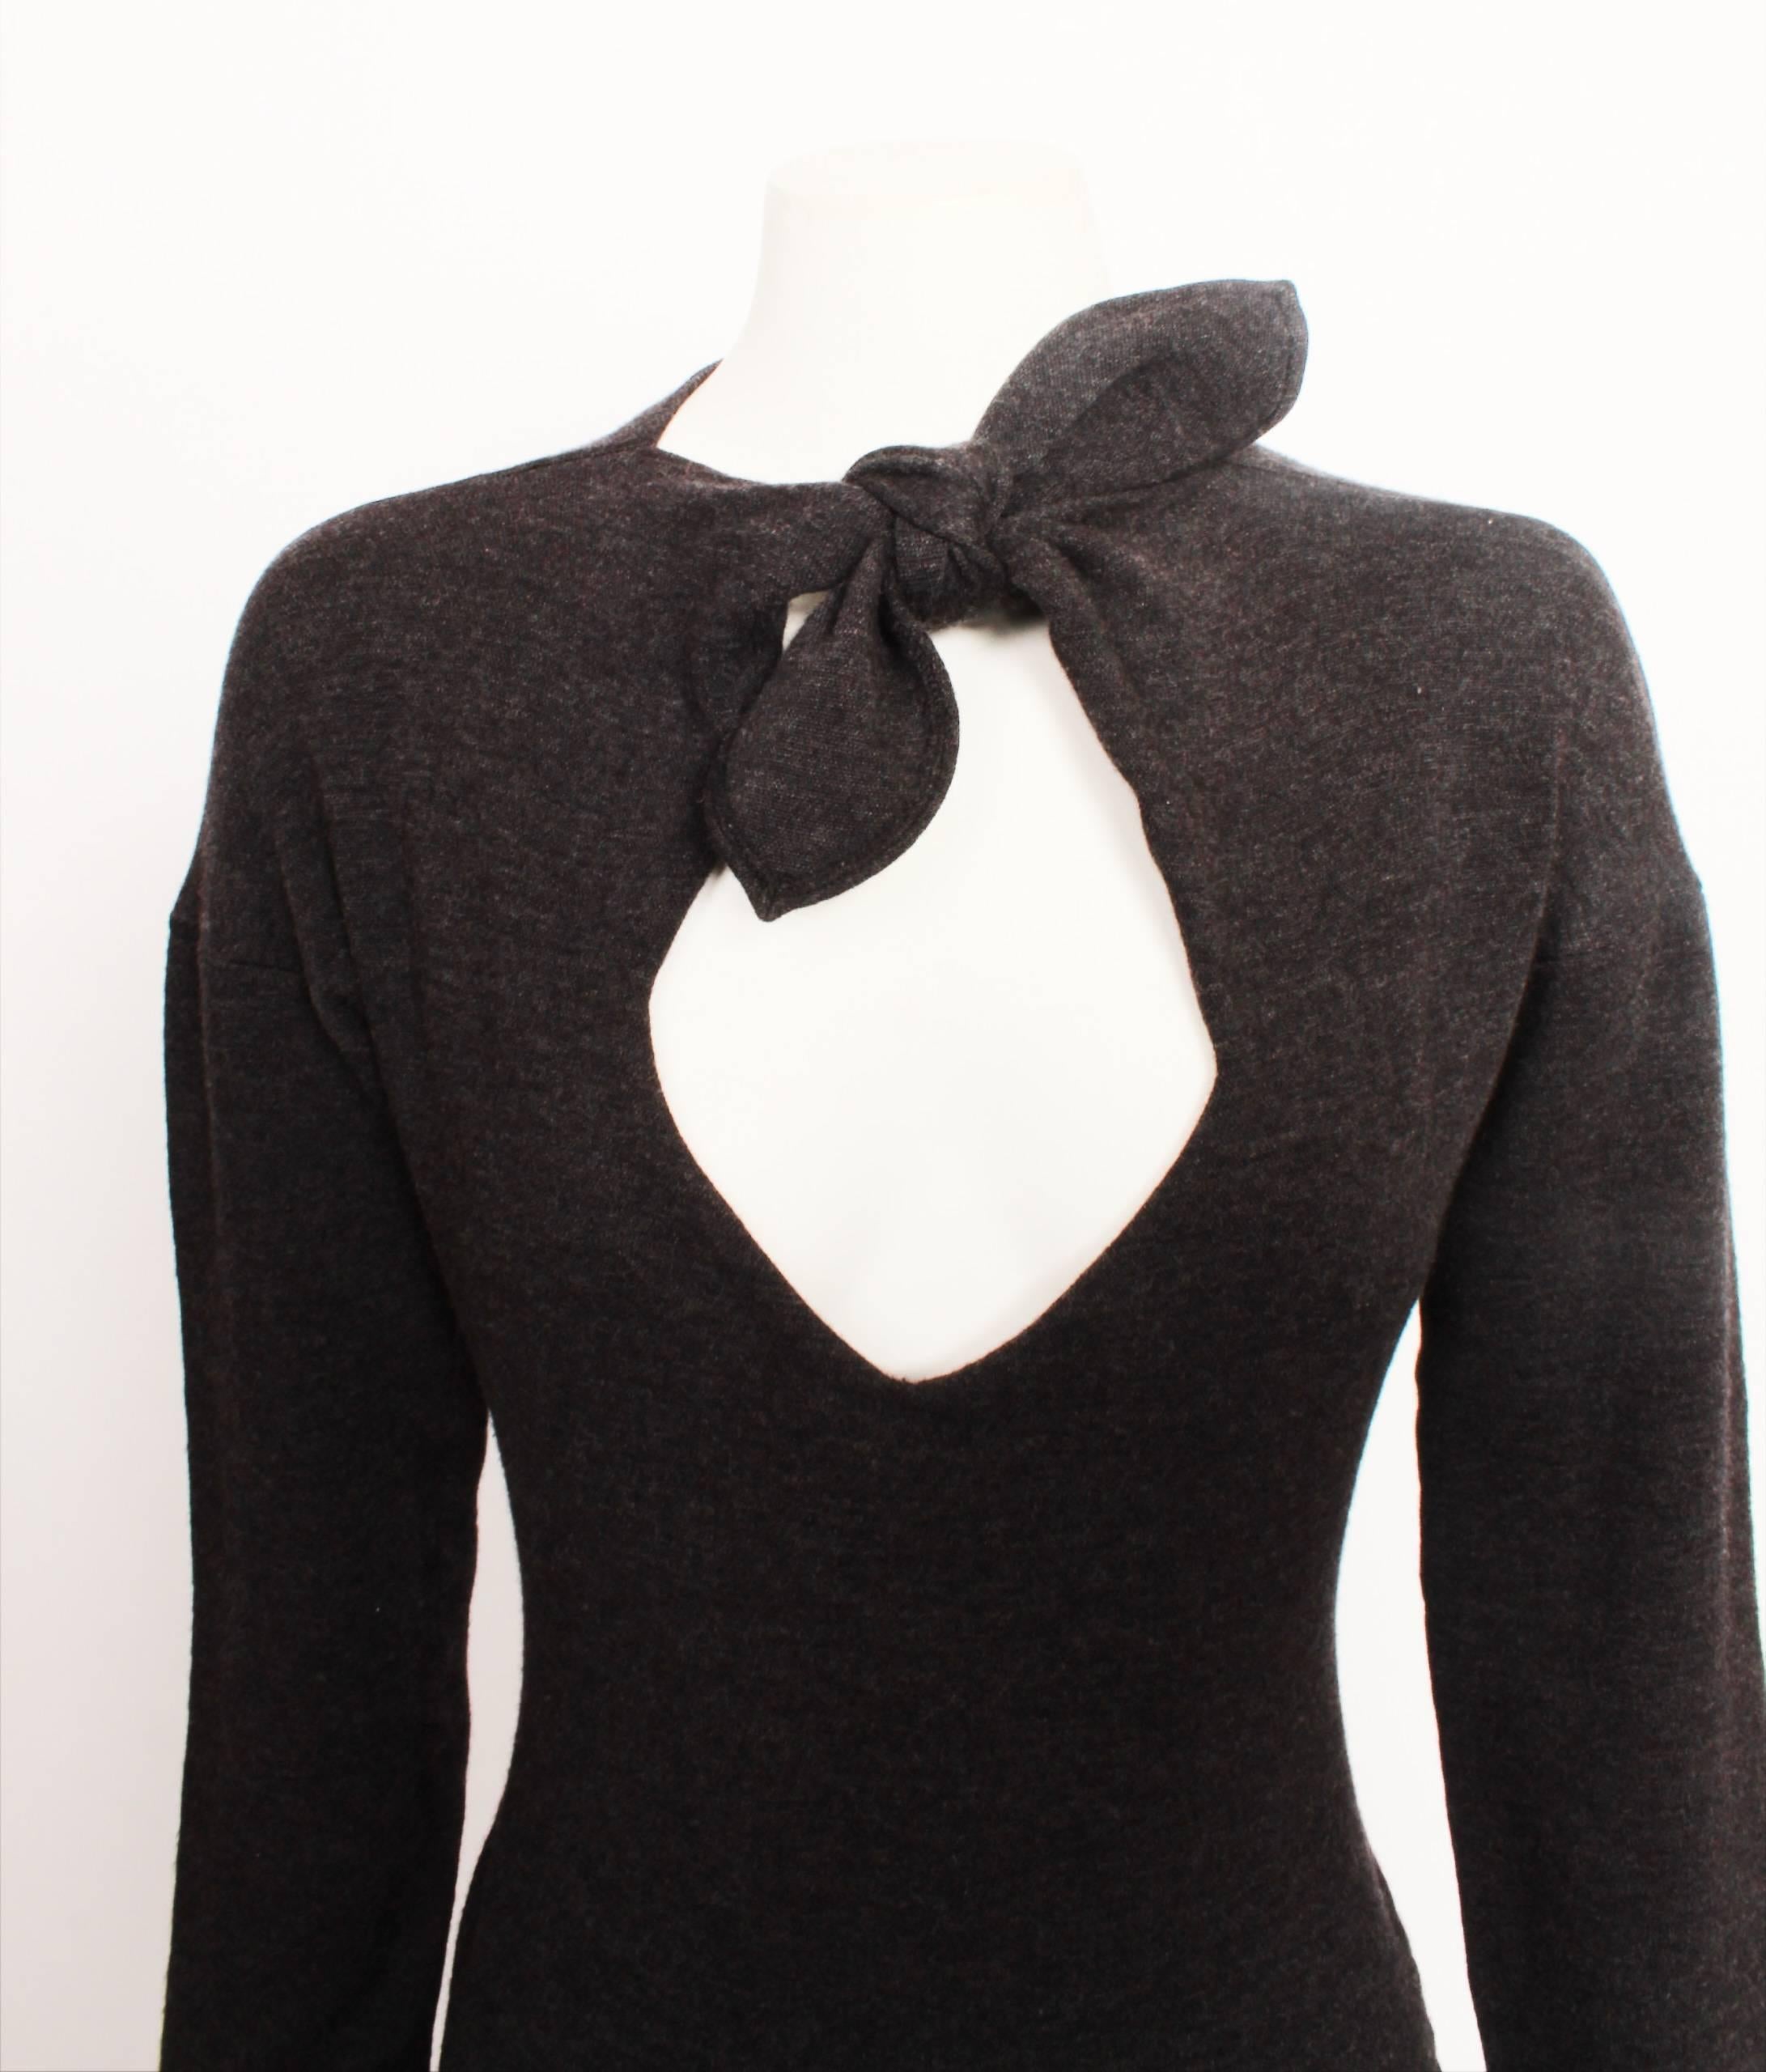 Romeo Gigli Charcoal Wool Jersey Body Con Sheath Dress In Good Condition For Sale In Melbourne, Victoria